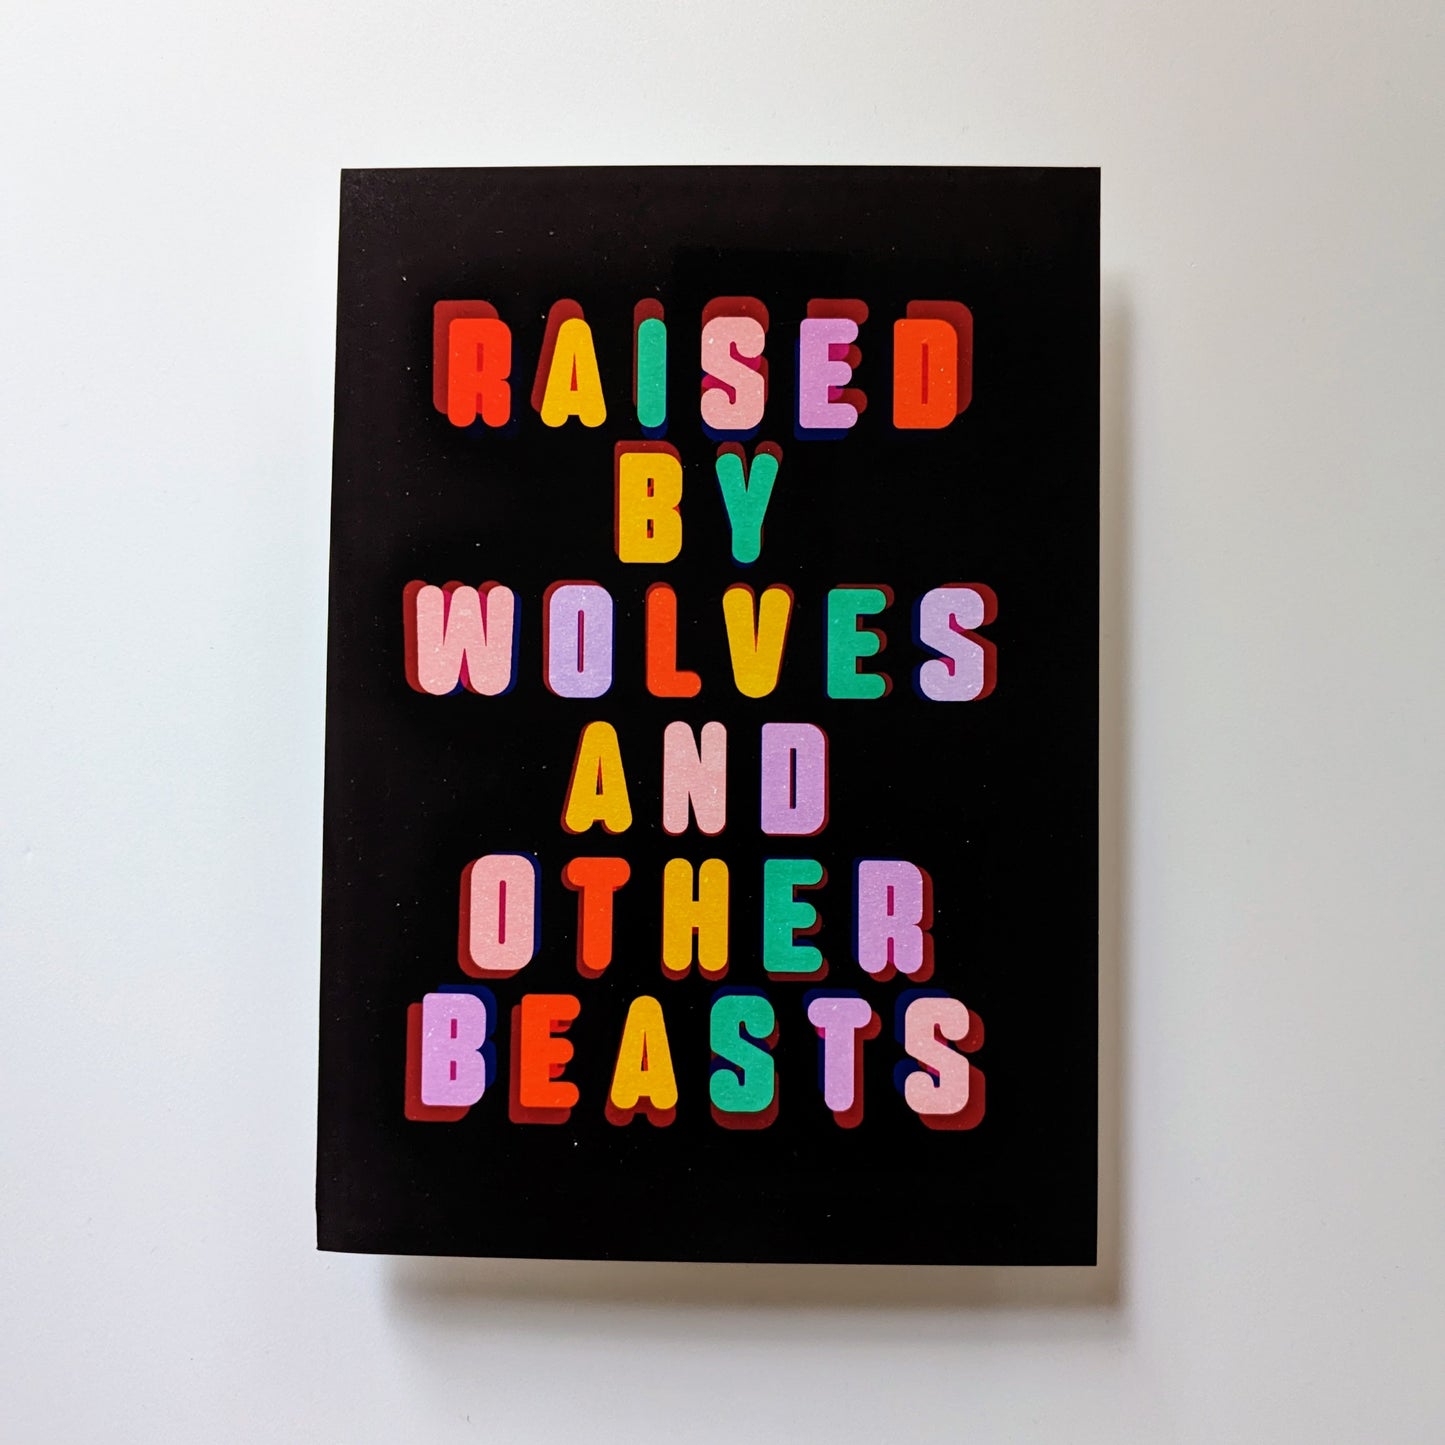 A5 Raised By Wolves Print  - Wonky Sale